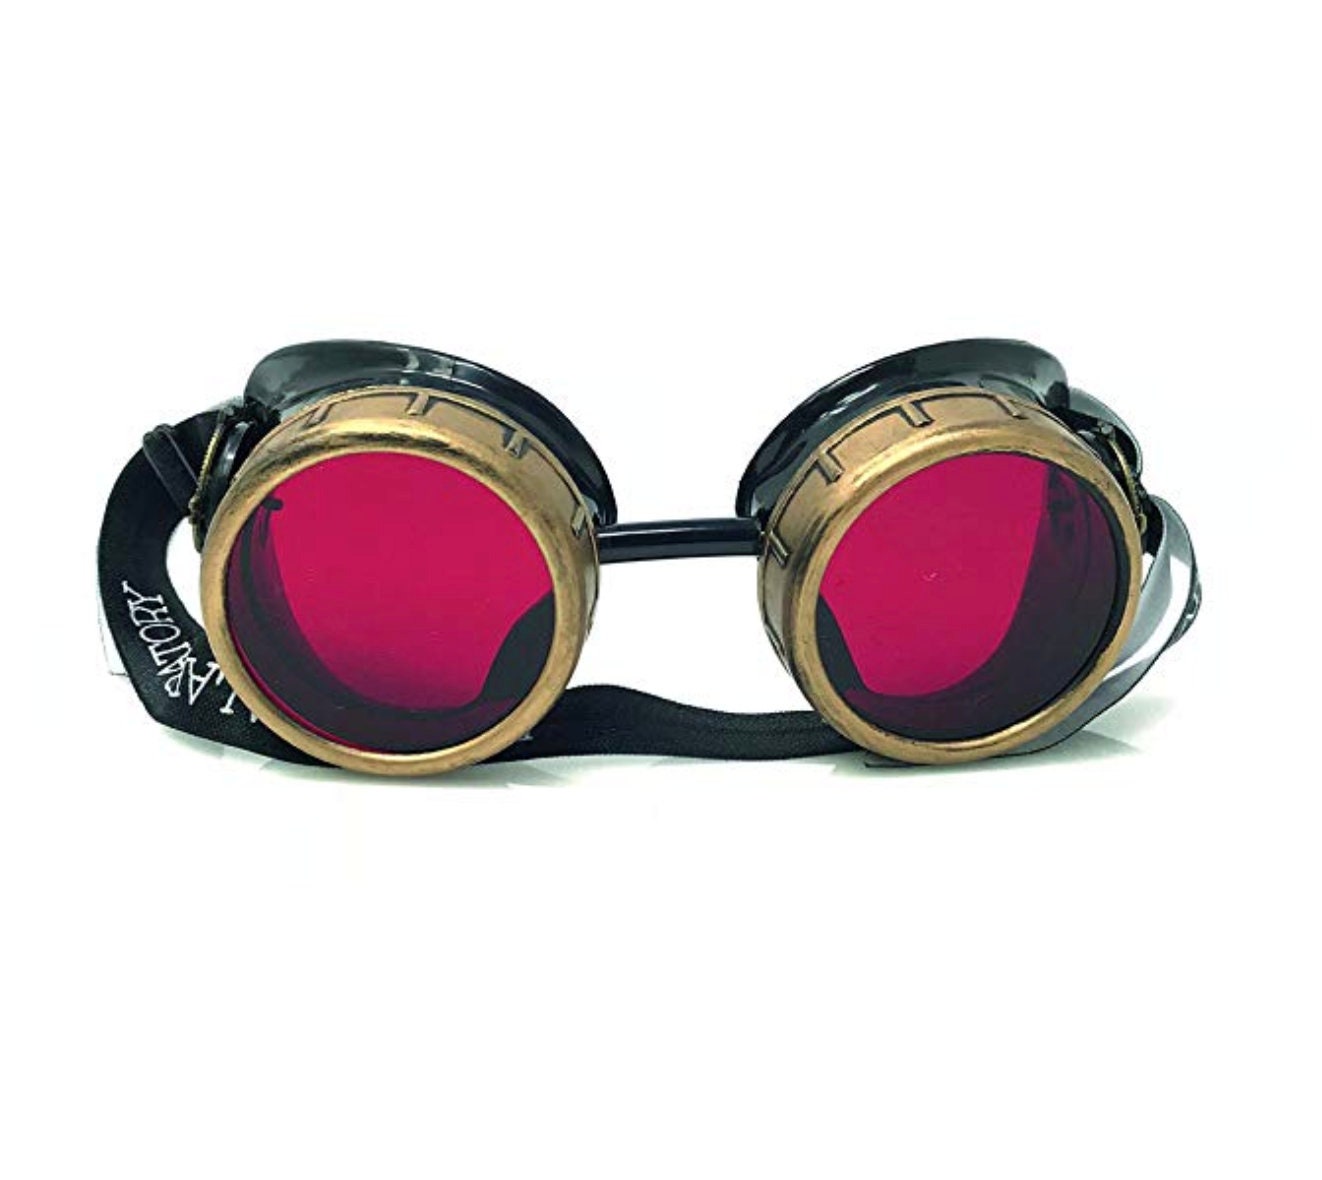 Steampunk Goggles-rave Glasses Victorian Style With Compass Design, Colored  Lenses & Ocular Loupe Costume Accessory Gcg -  UK